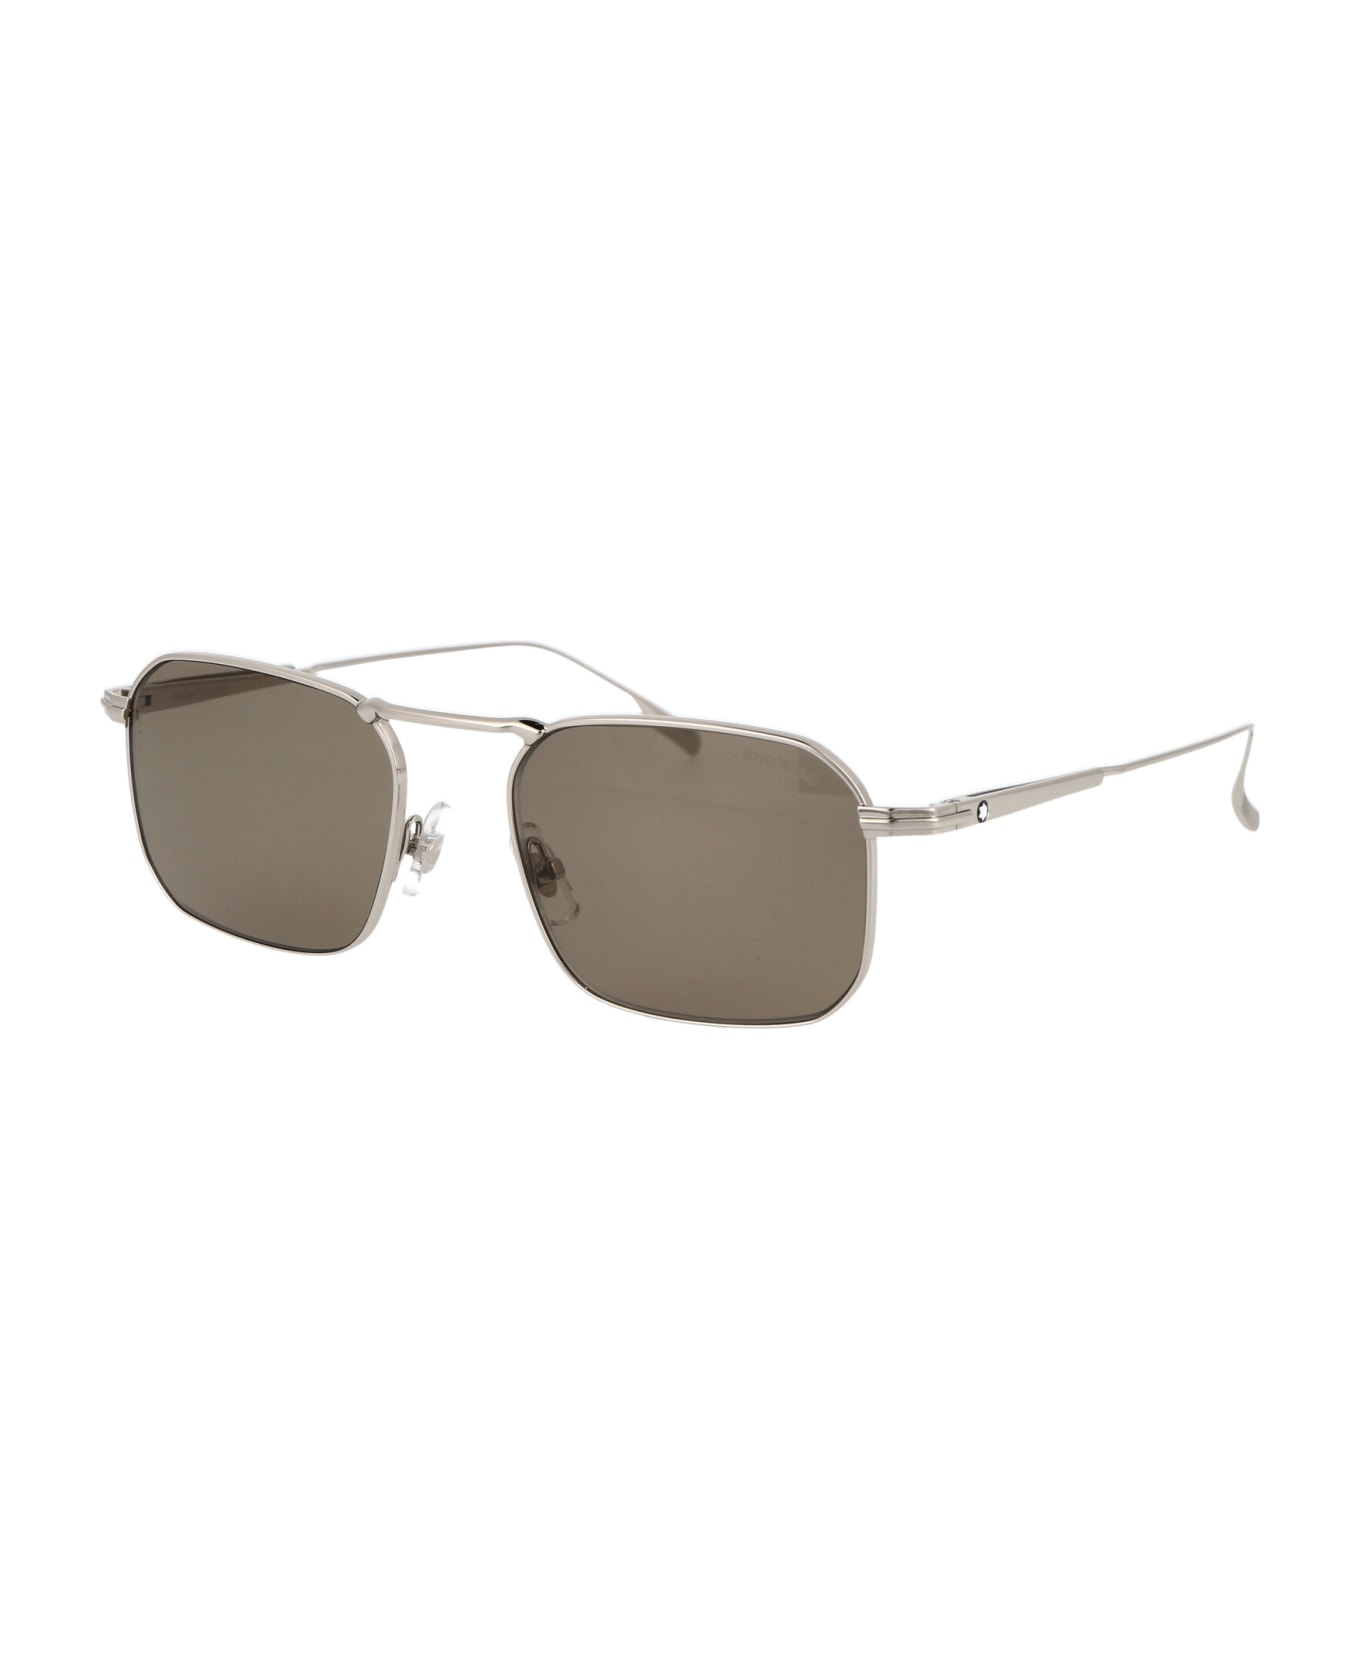 Montblanc Mb0218s Sunglasses - 003 SILVER SILVER BROWN サングラス